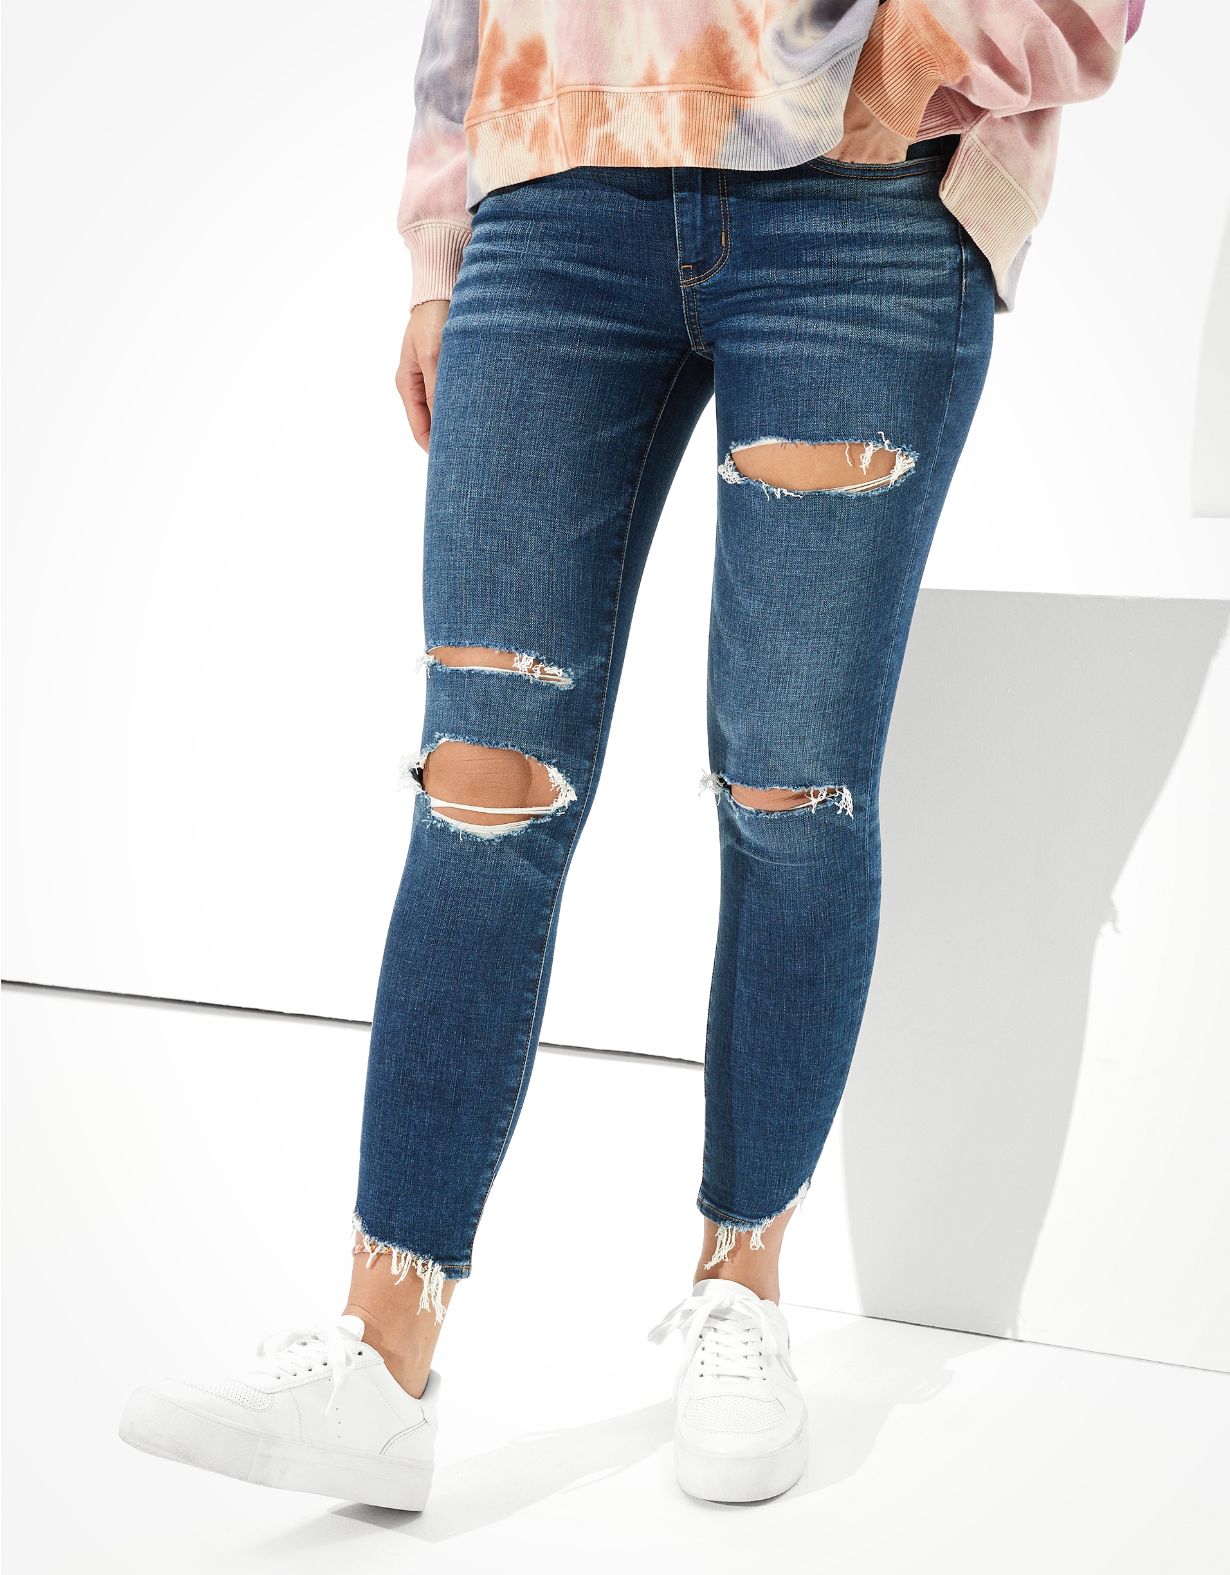 AE Ripped Jegging Crop